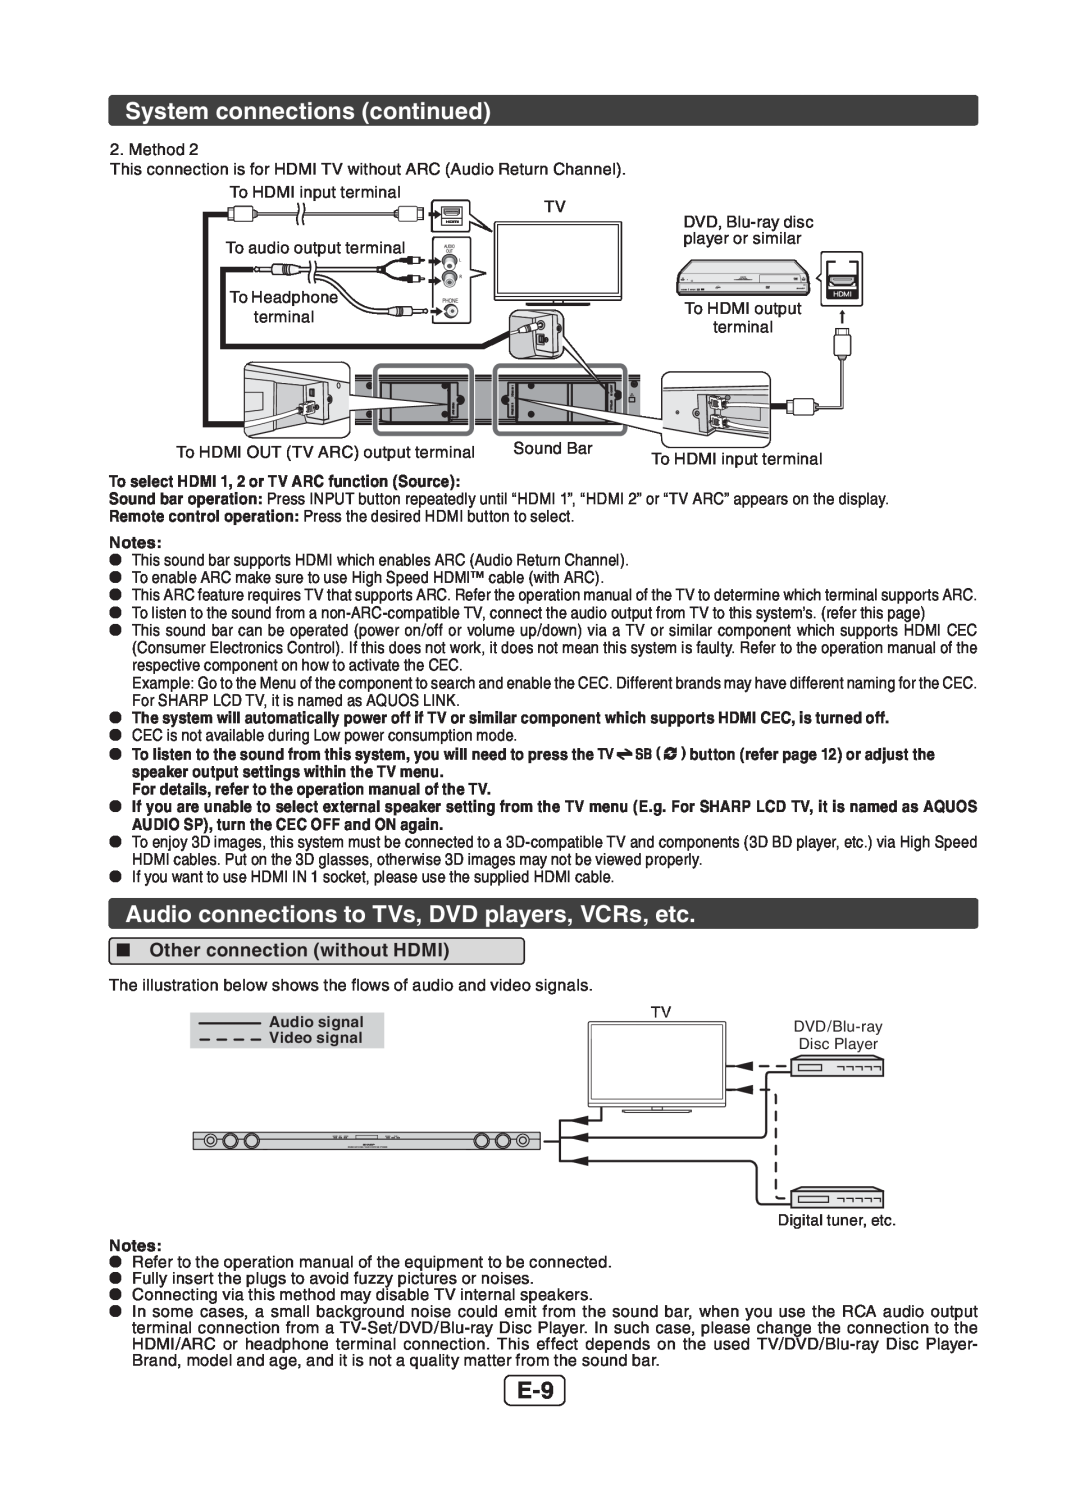 Sharp HT-SB602 operation manual Audio connections to TVs, DVD players, VCRs, etc, System connections continued 